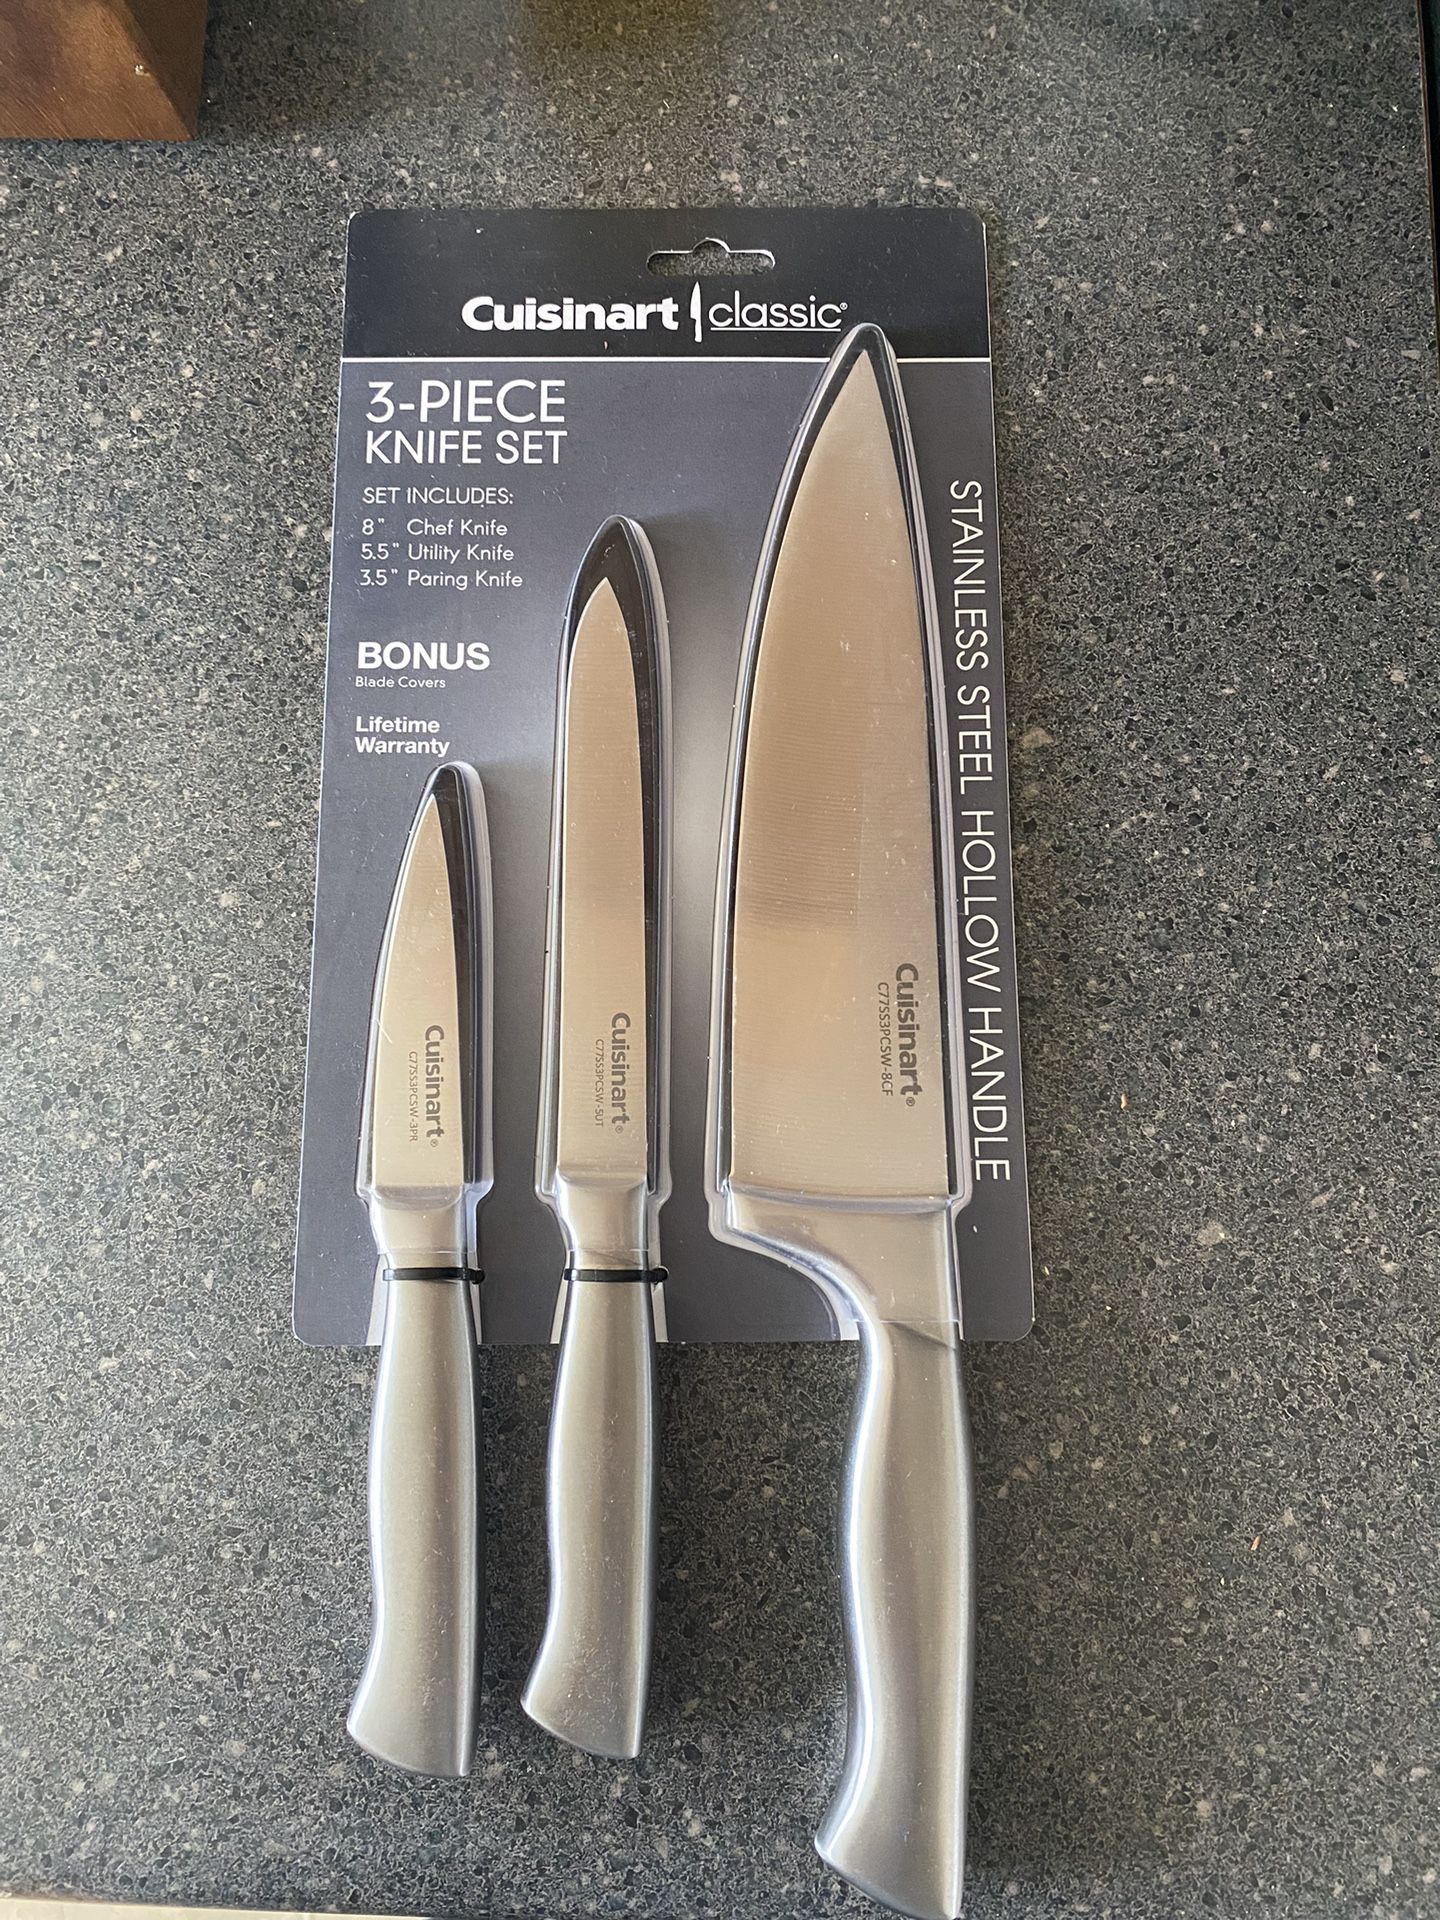 Cuisinart Stainless Steel 3-Piece Chef Set, C77ss-3pcsw